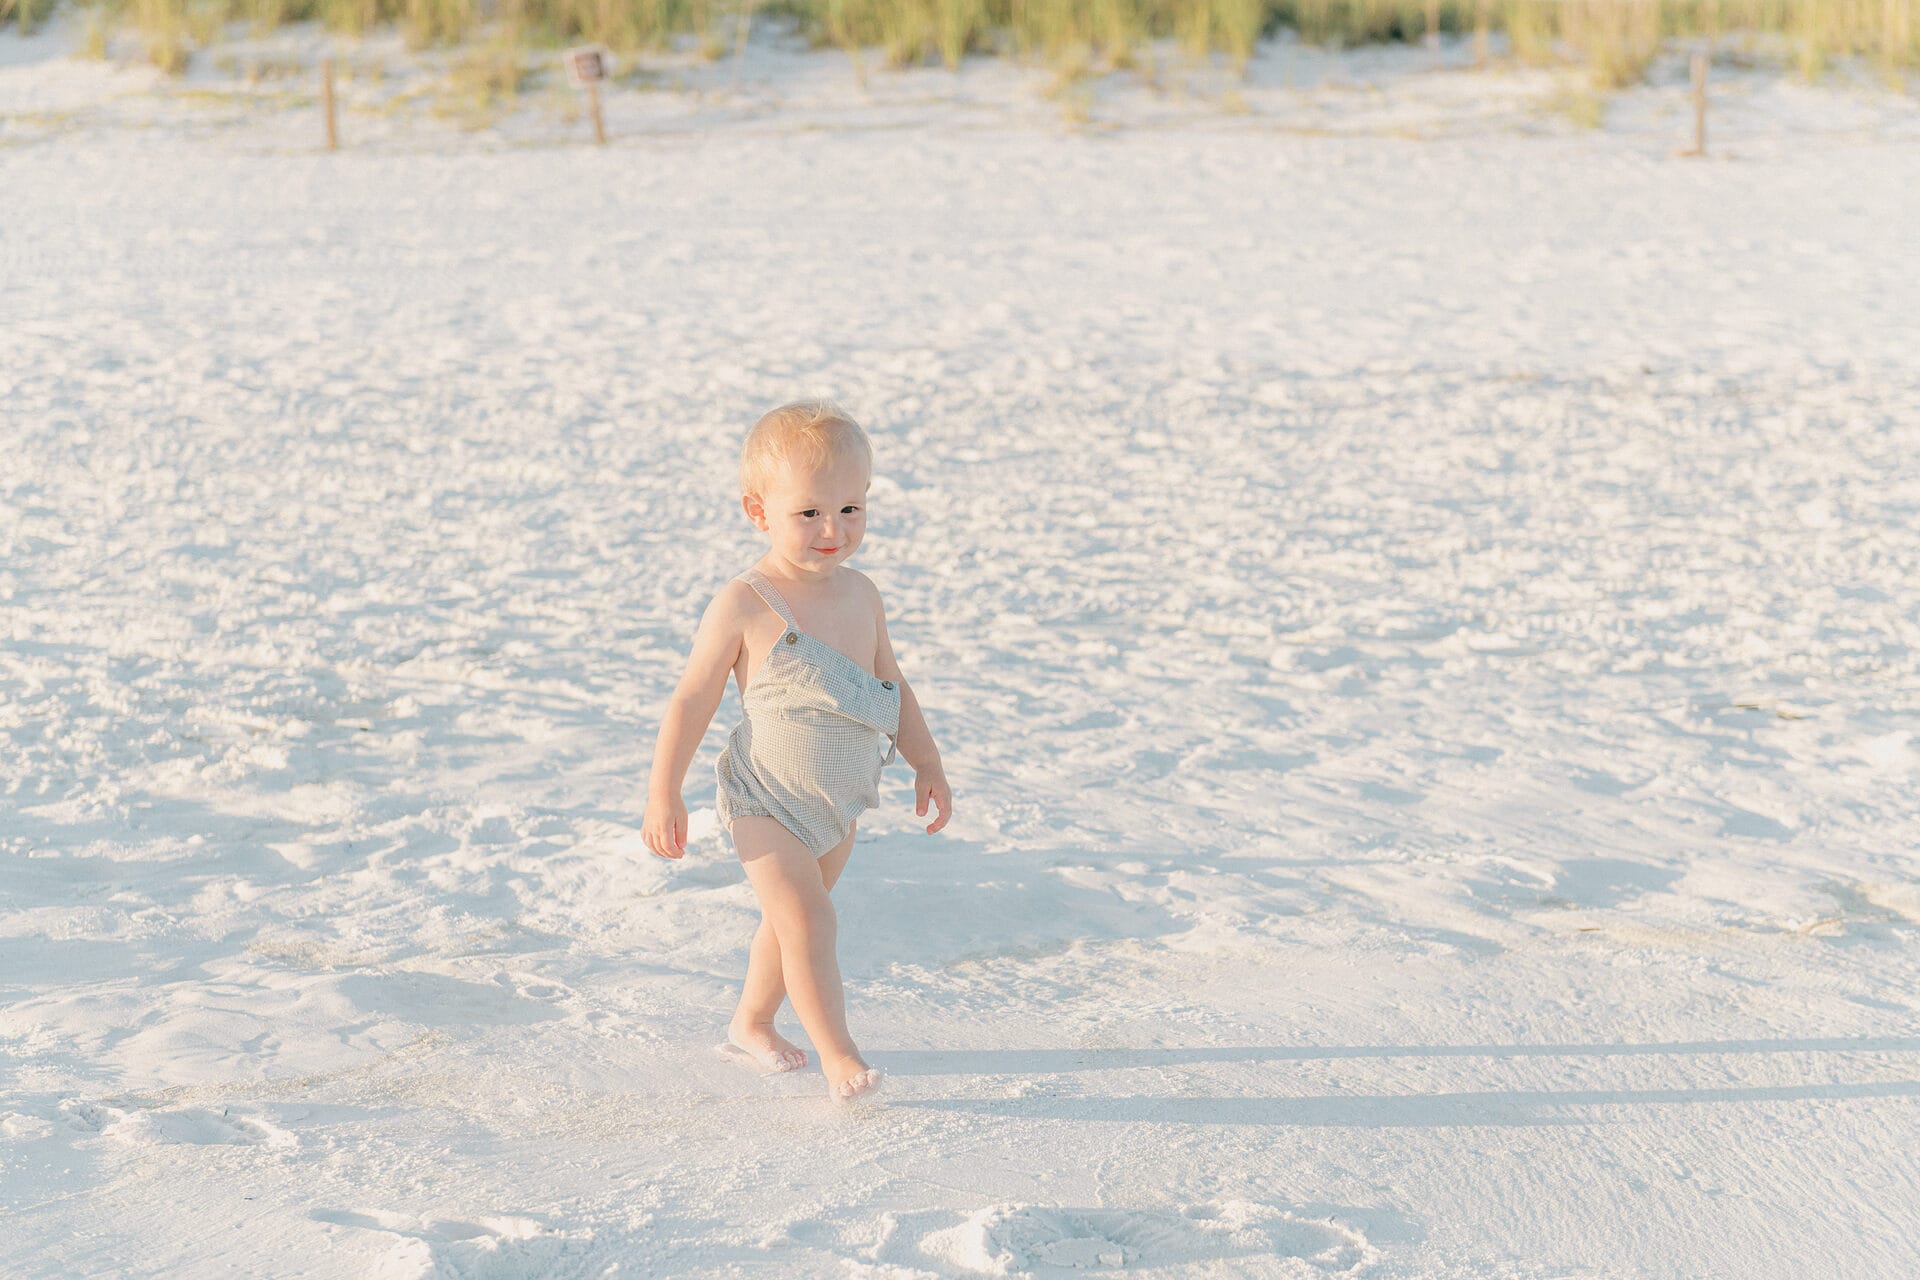 A baby walking in the sand on the beach.